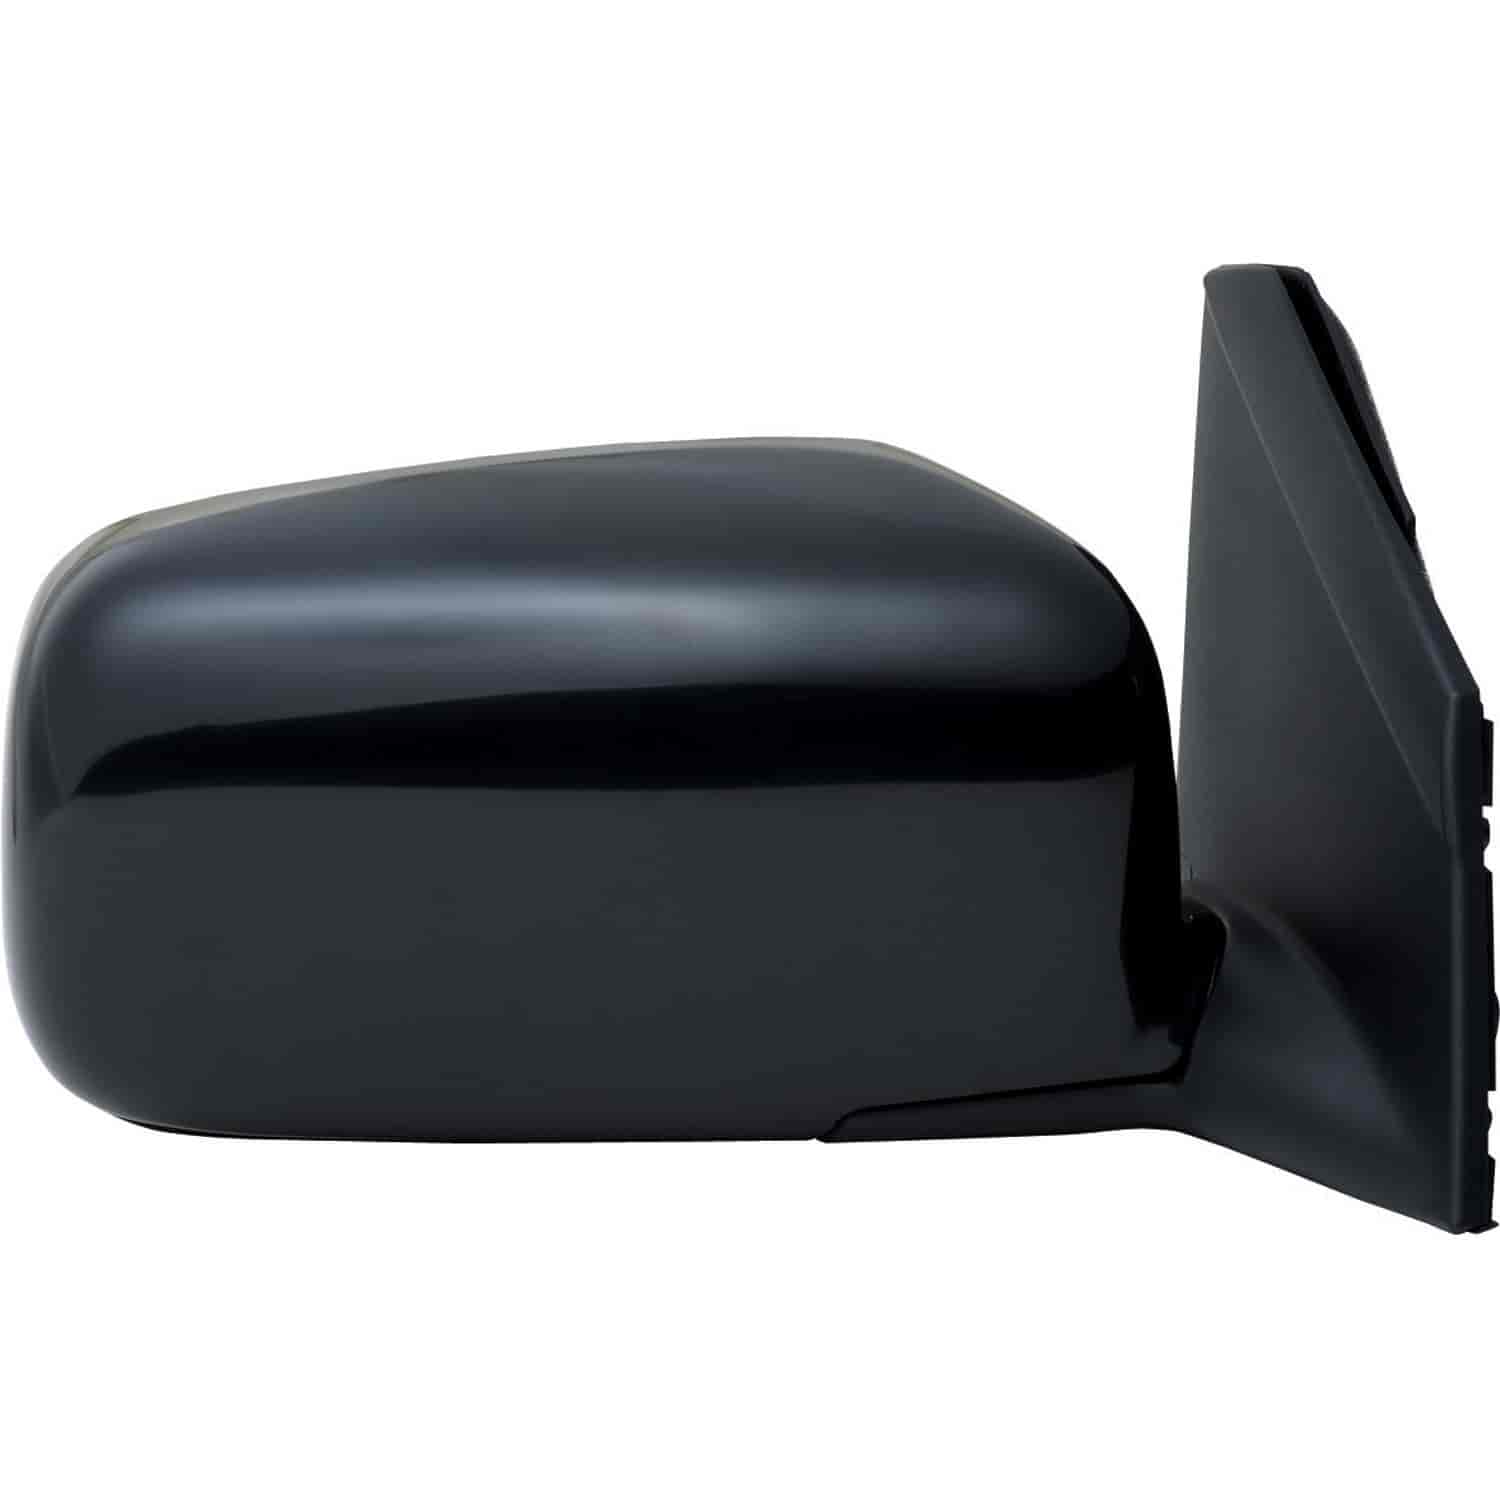 OEM Style Replacement mirror for 02-07 Mitsubishi Lancer passenger side mirror tested to fit and fun